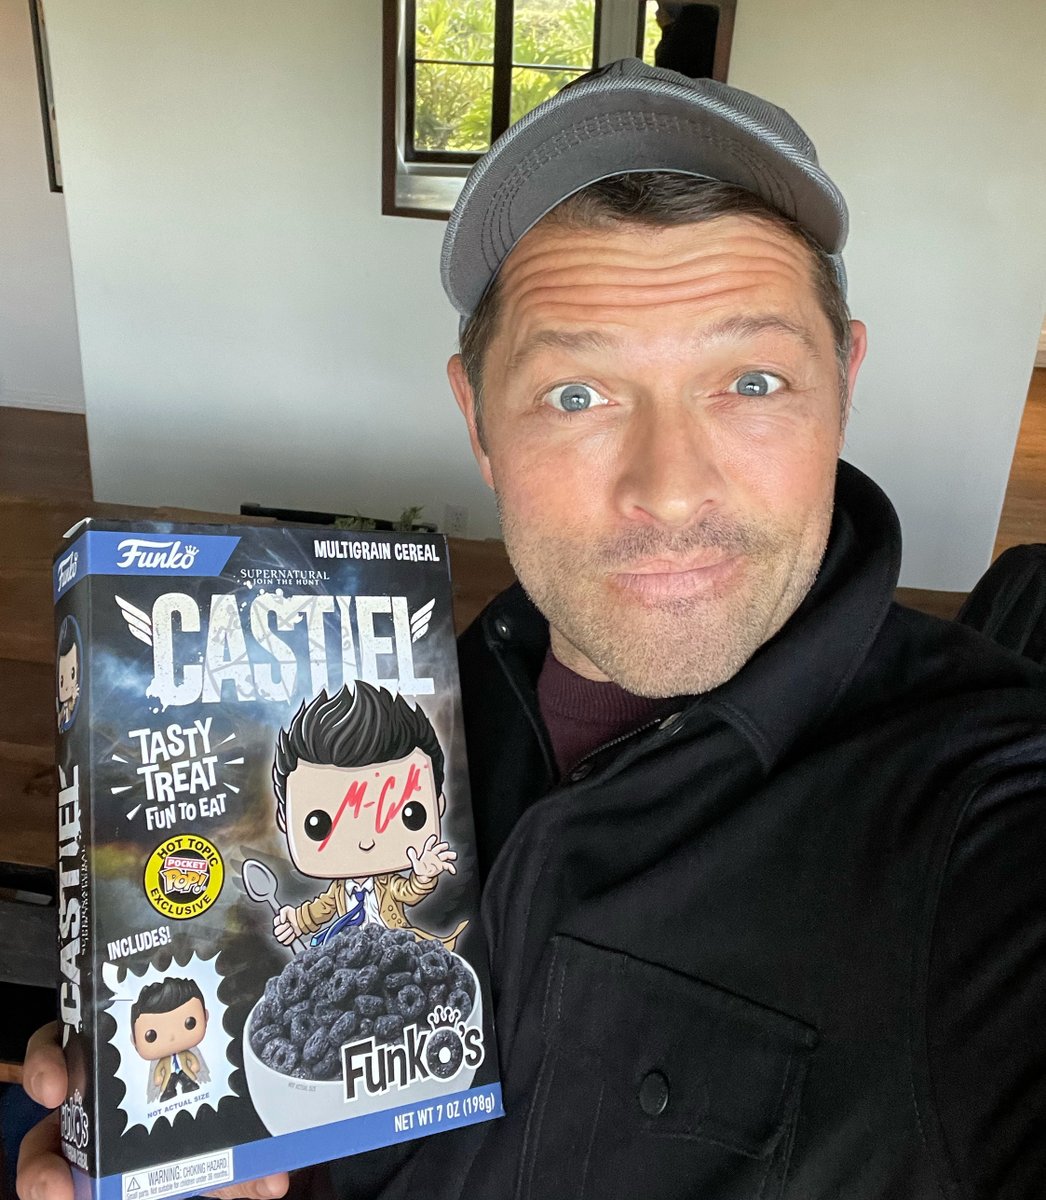 I miss you. Want to hang with me? Come be my plus-one at Lydia Place's virtual gala! Pay what you can — $0 to $infinity for a good cause! Then, we’ll reminisce & solve the world’s problems. (I might even give you this Castiel cereal I found in the pantry.) heartsforhousing.com